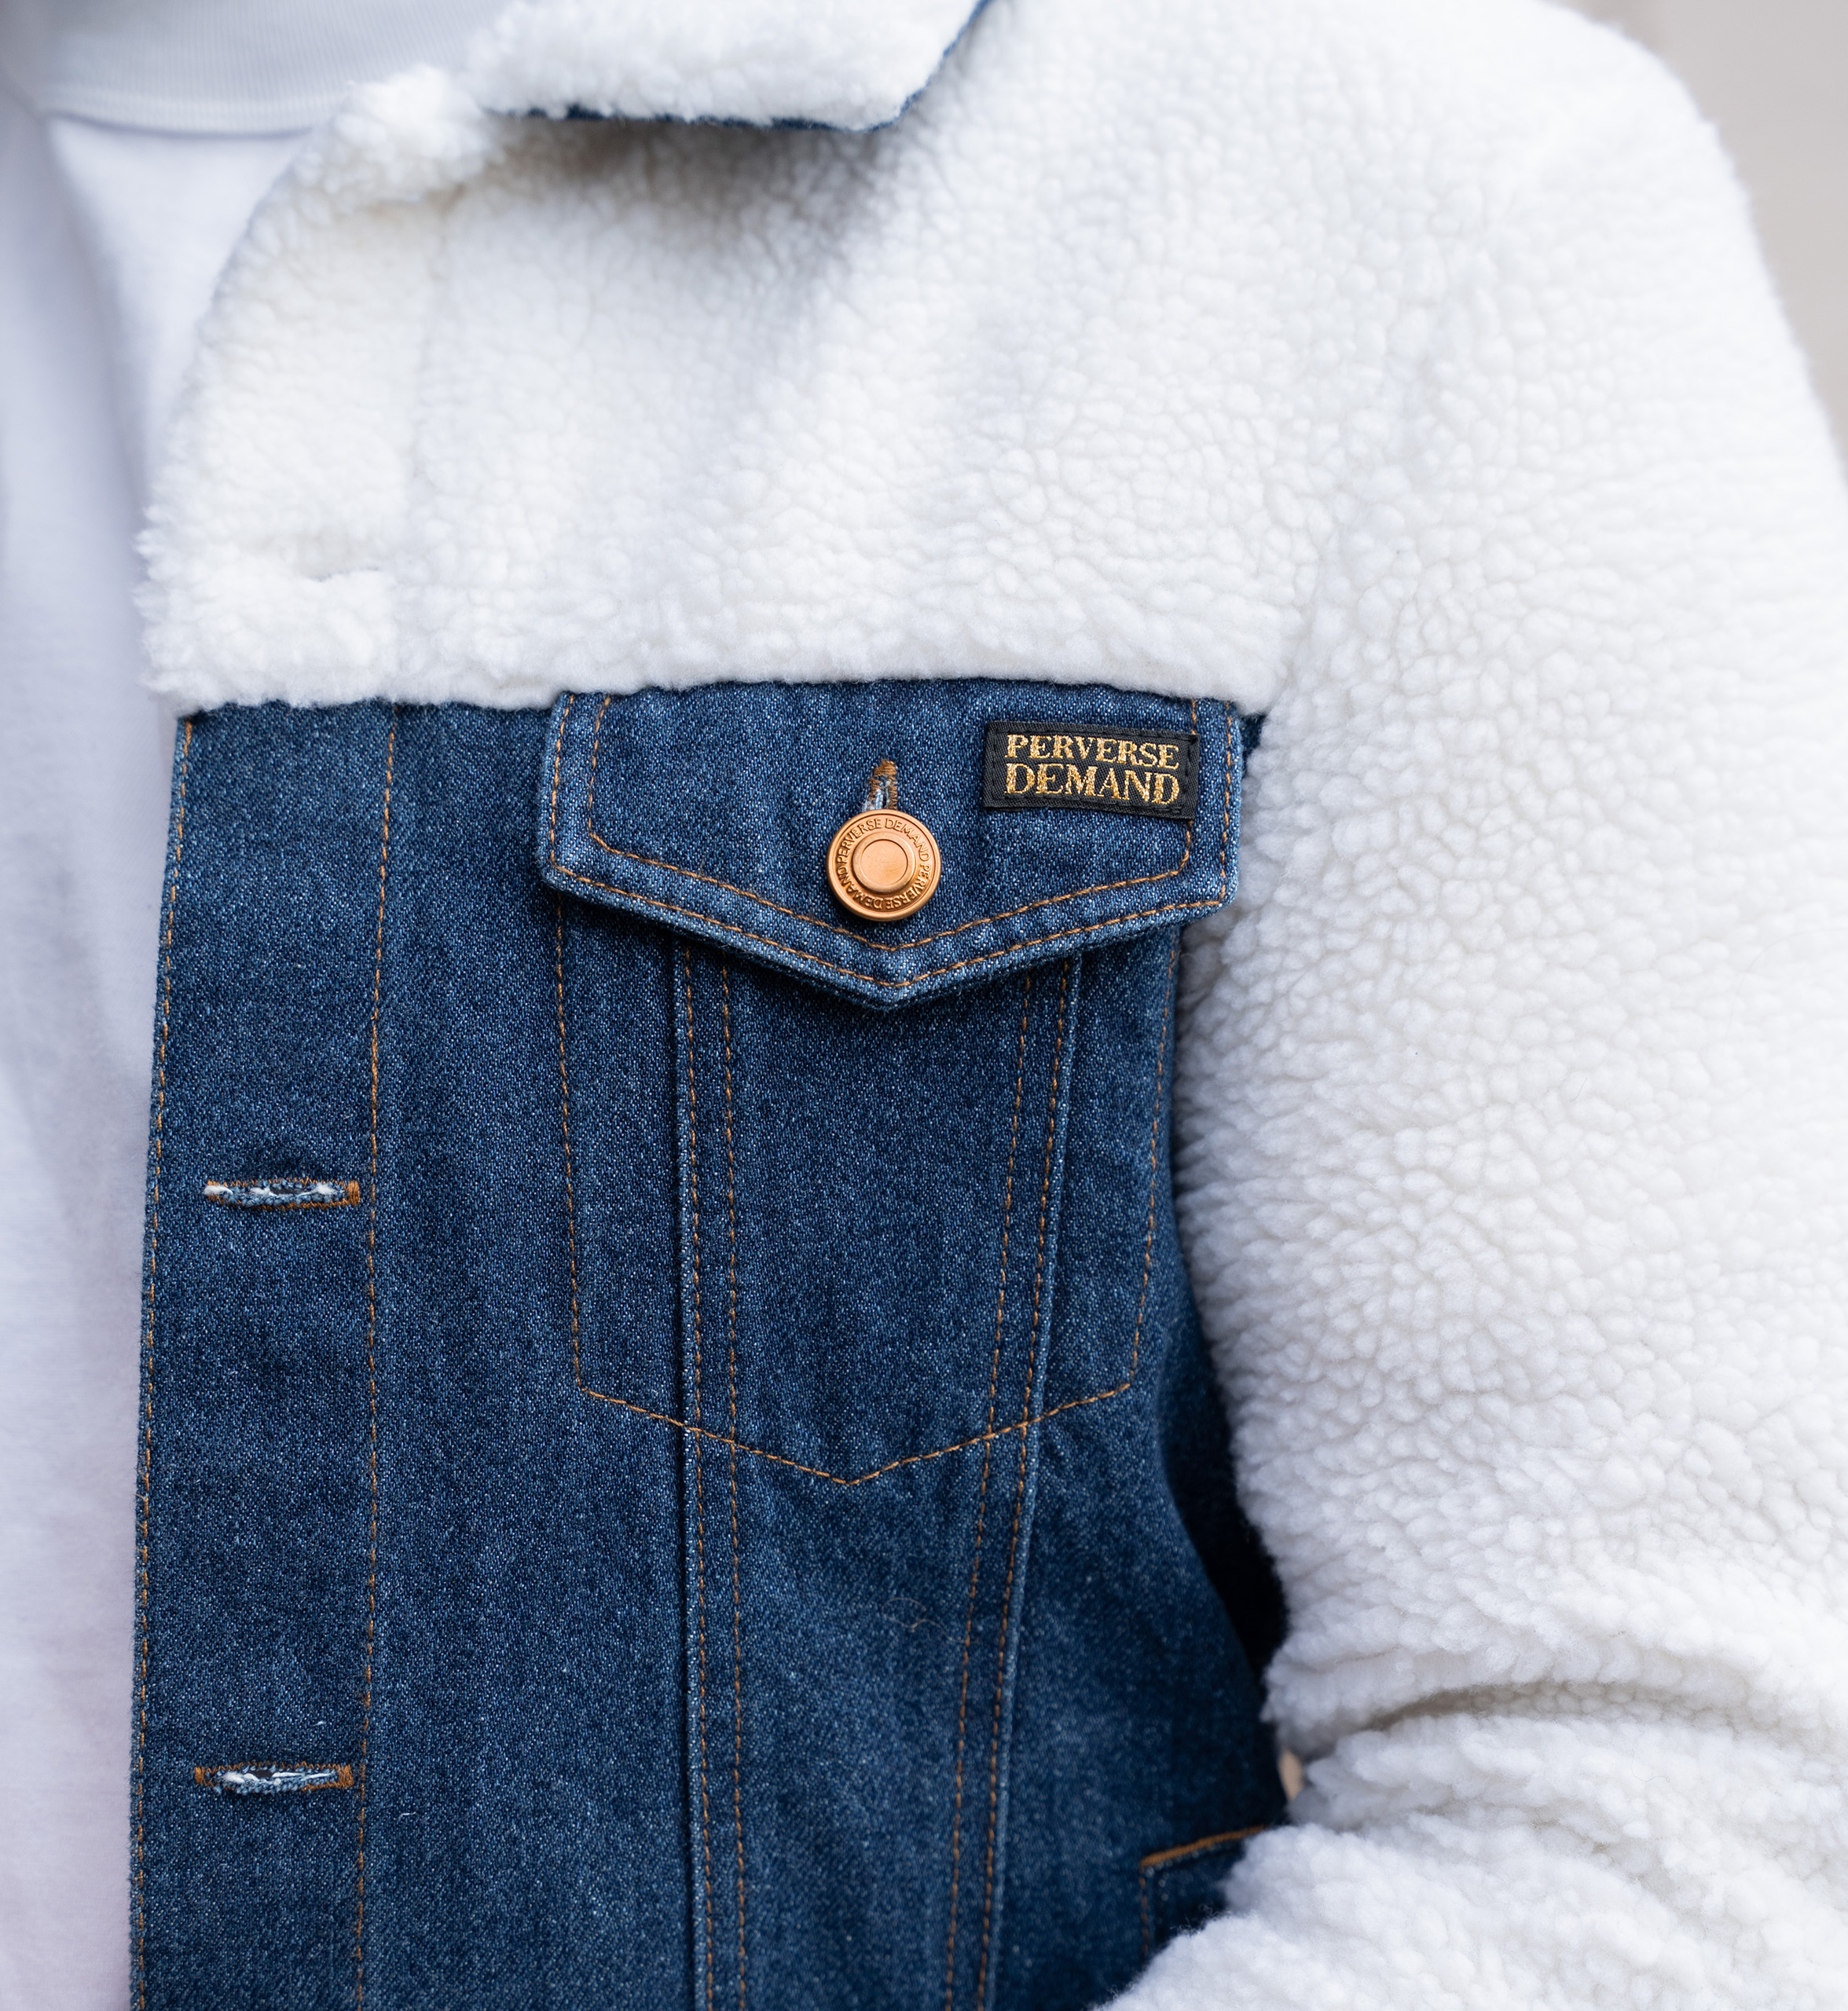 The addition of cream sherpa elevates the classic streetwear denim jacket.